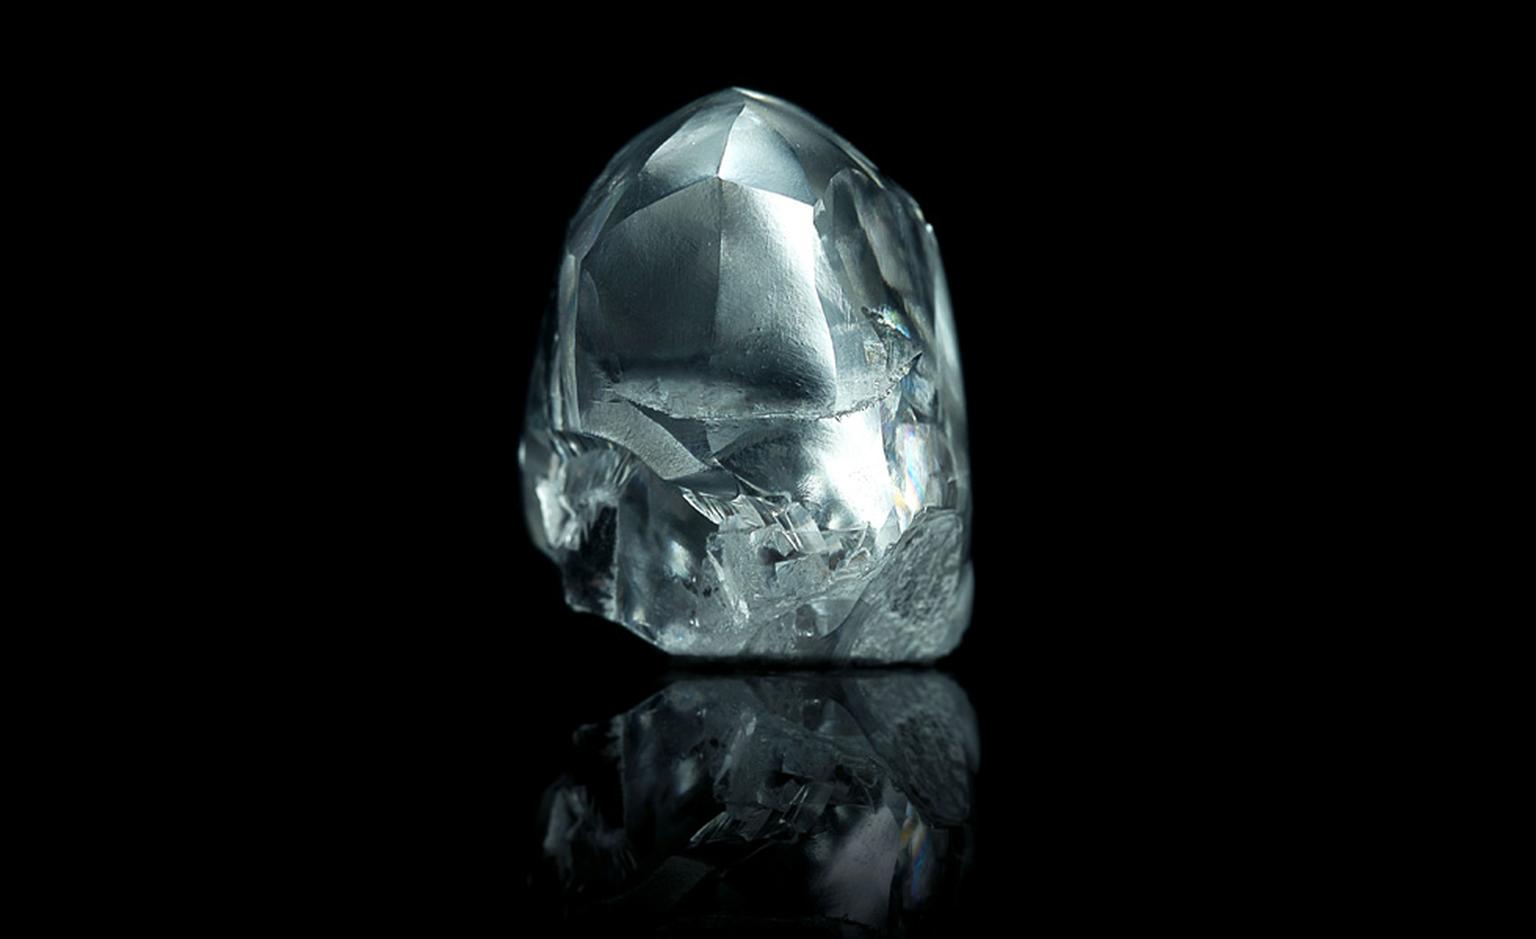 The 550 carat Letseng Star discovered in Lesotho August 2011.